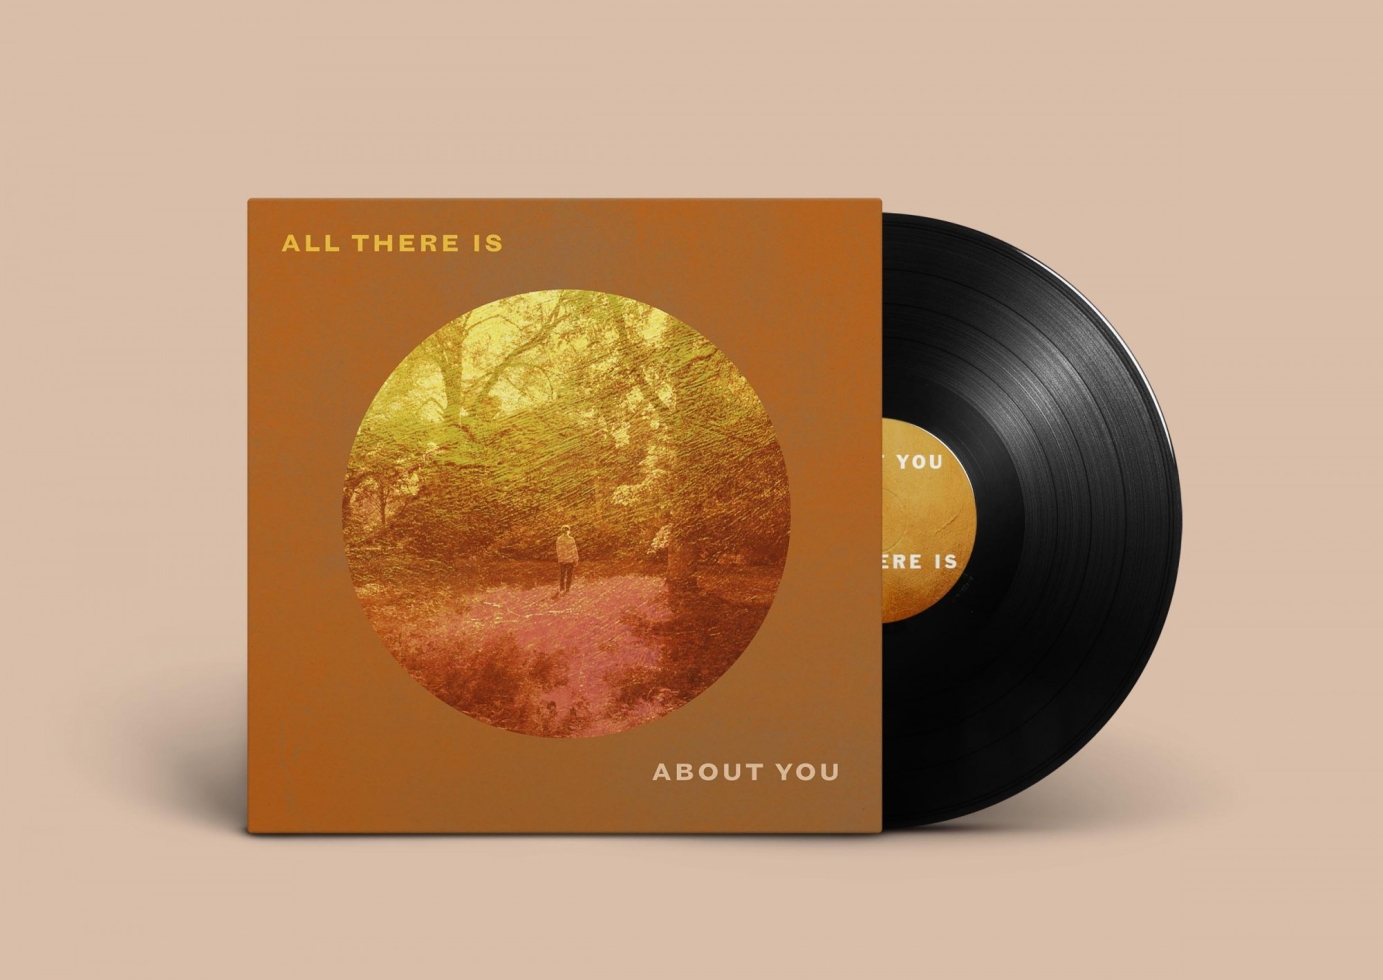 All There Is by About You Album Cover Design